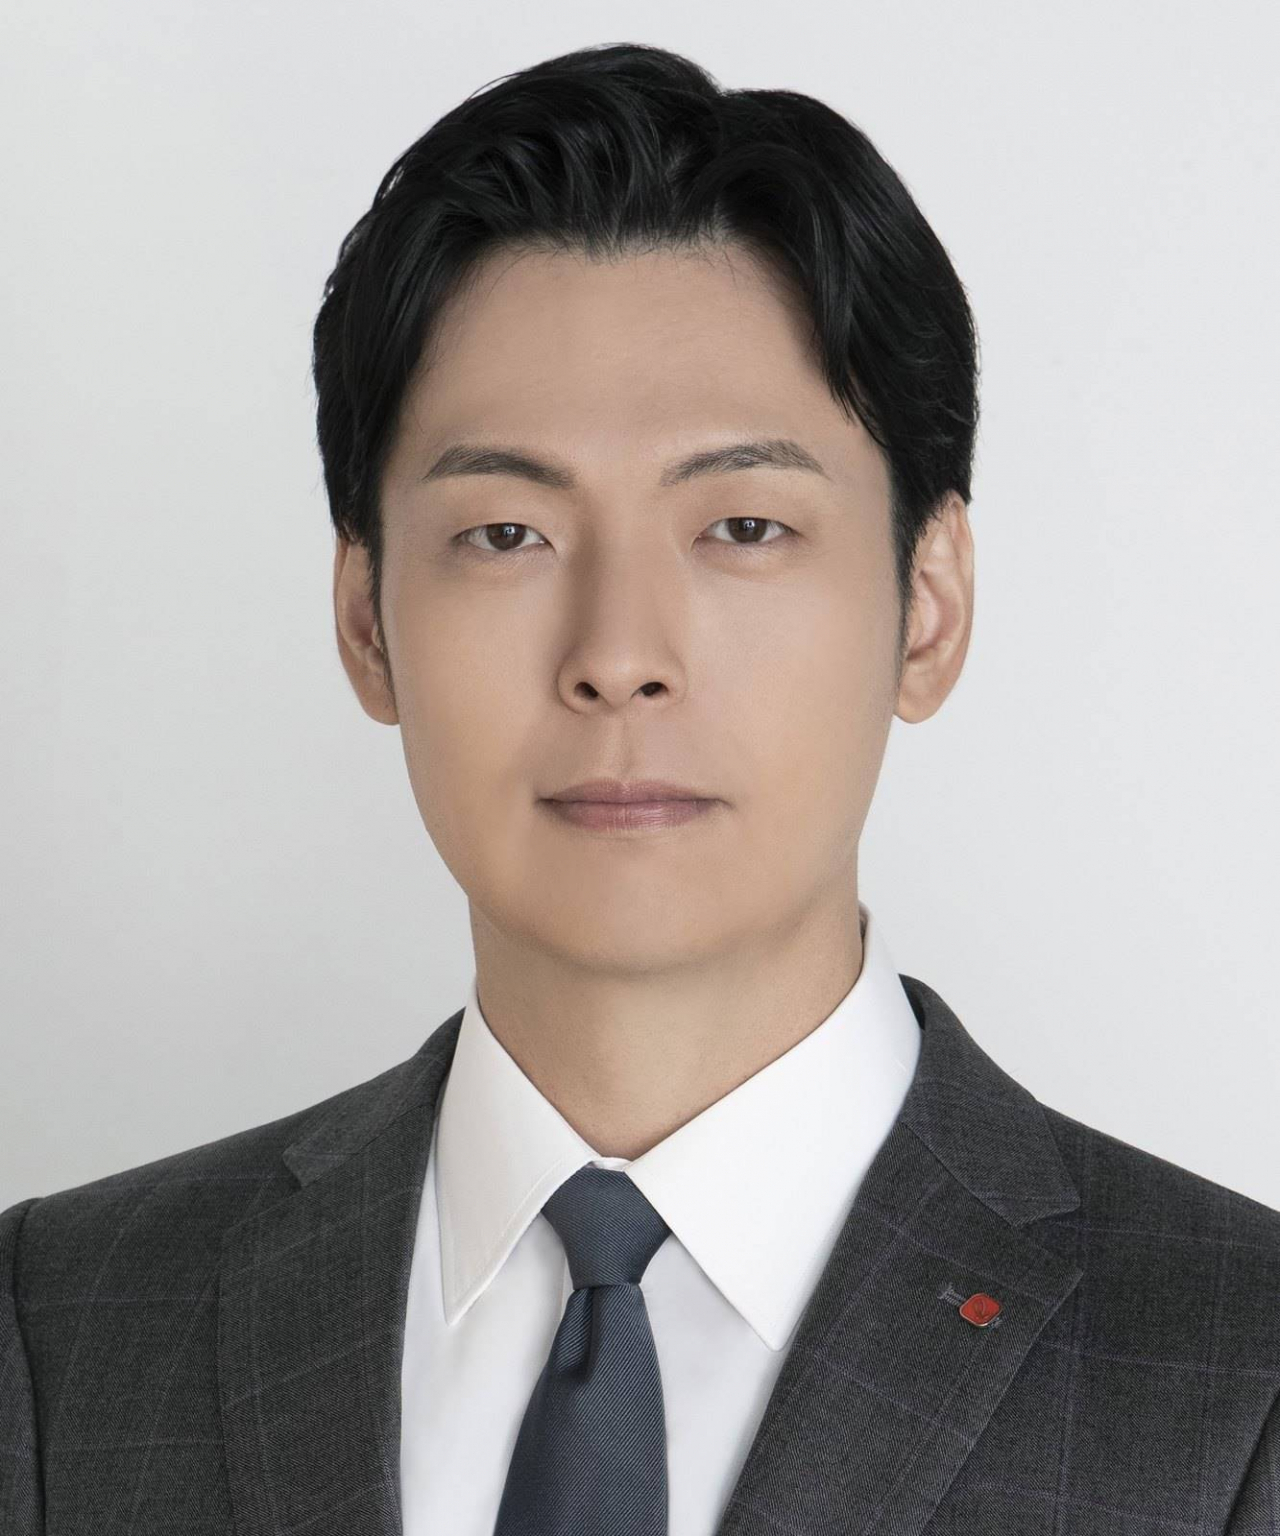 Lotte Group Chairman Shin Dong-Bin's eldest son Shin Yoo-yeol, who is to head the group's Future Strategy Office (Lotte Group)